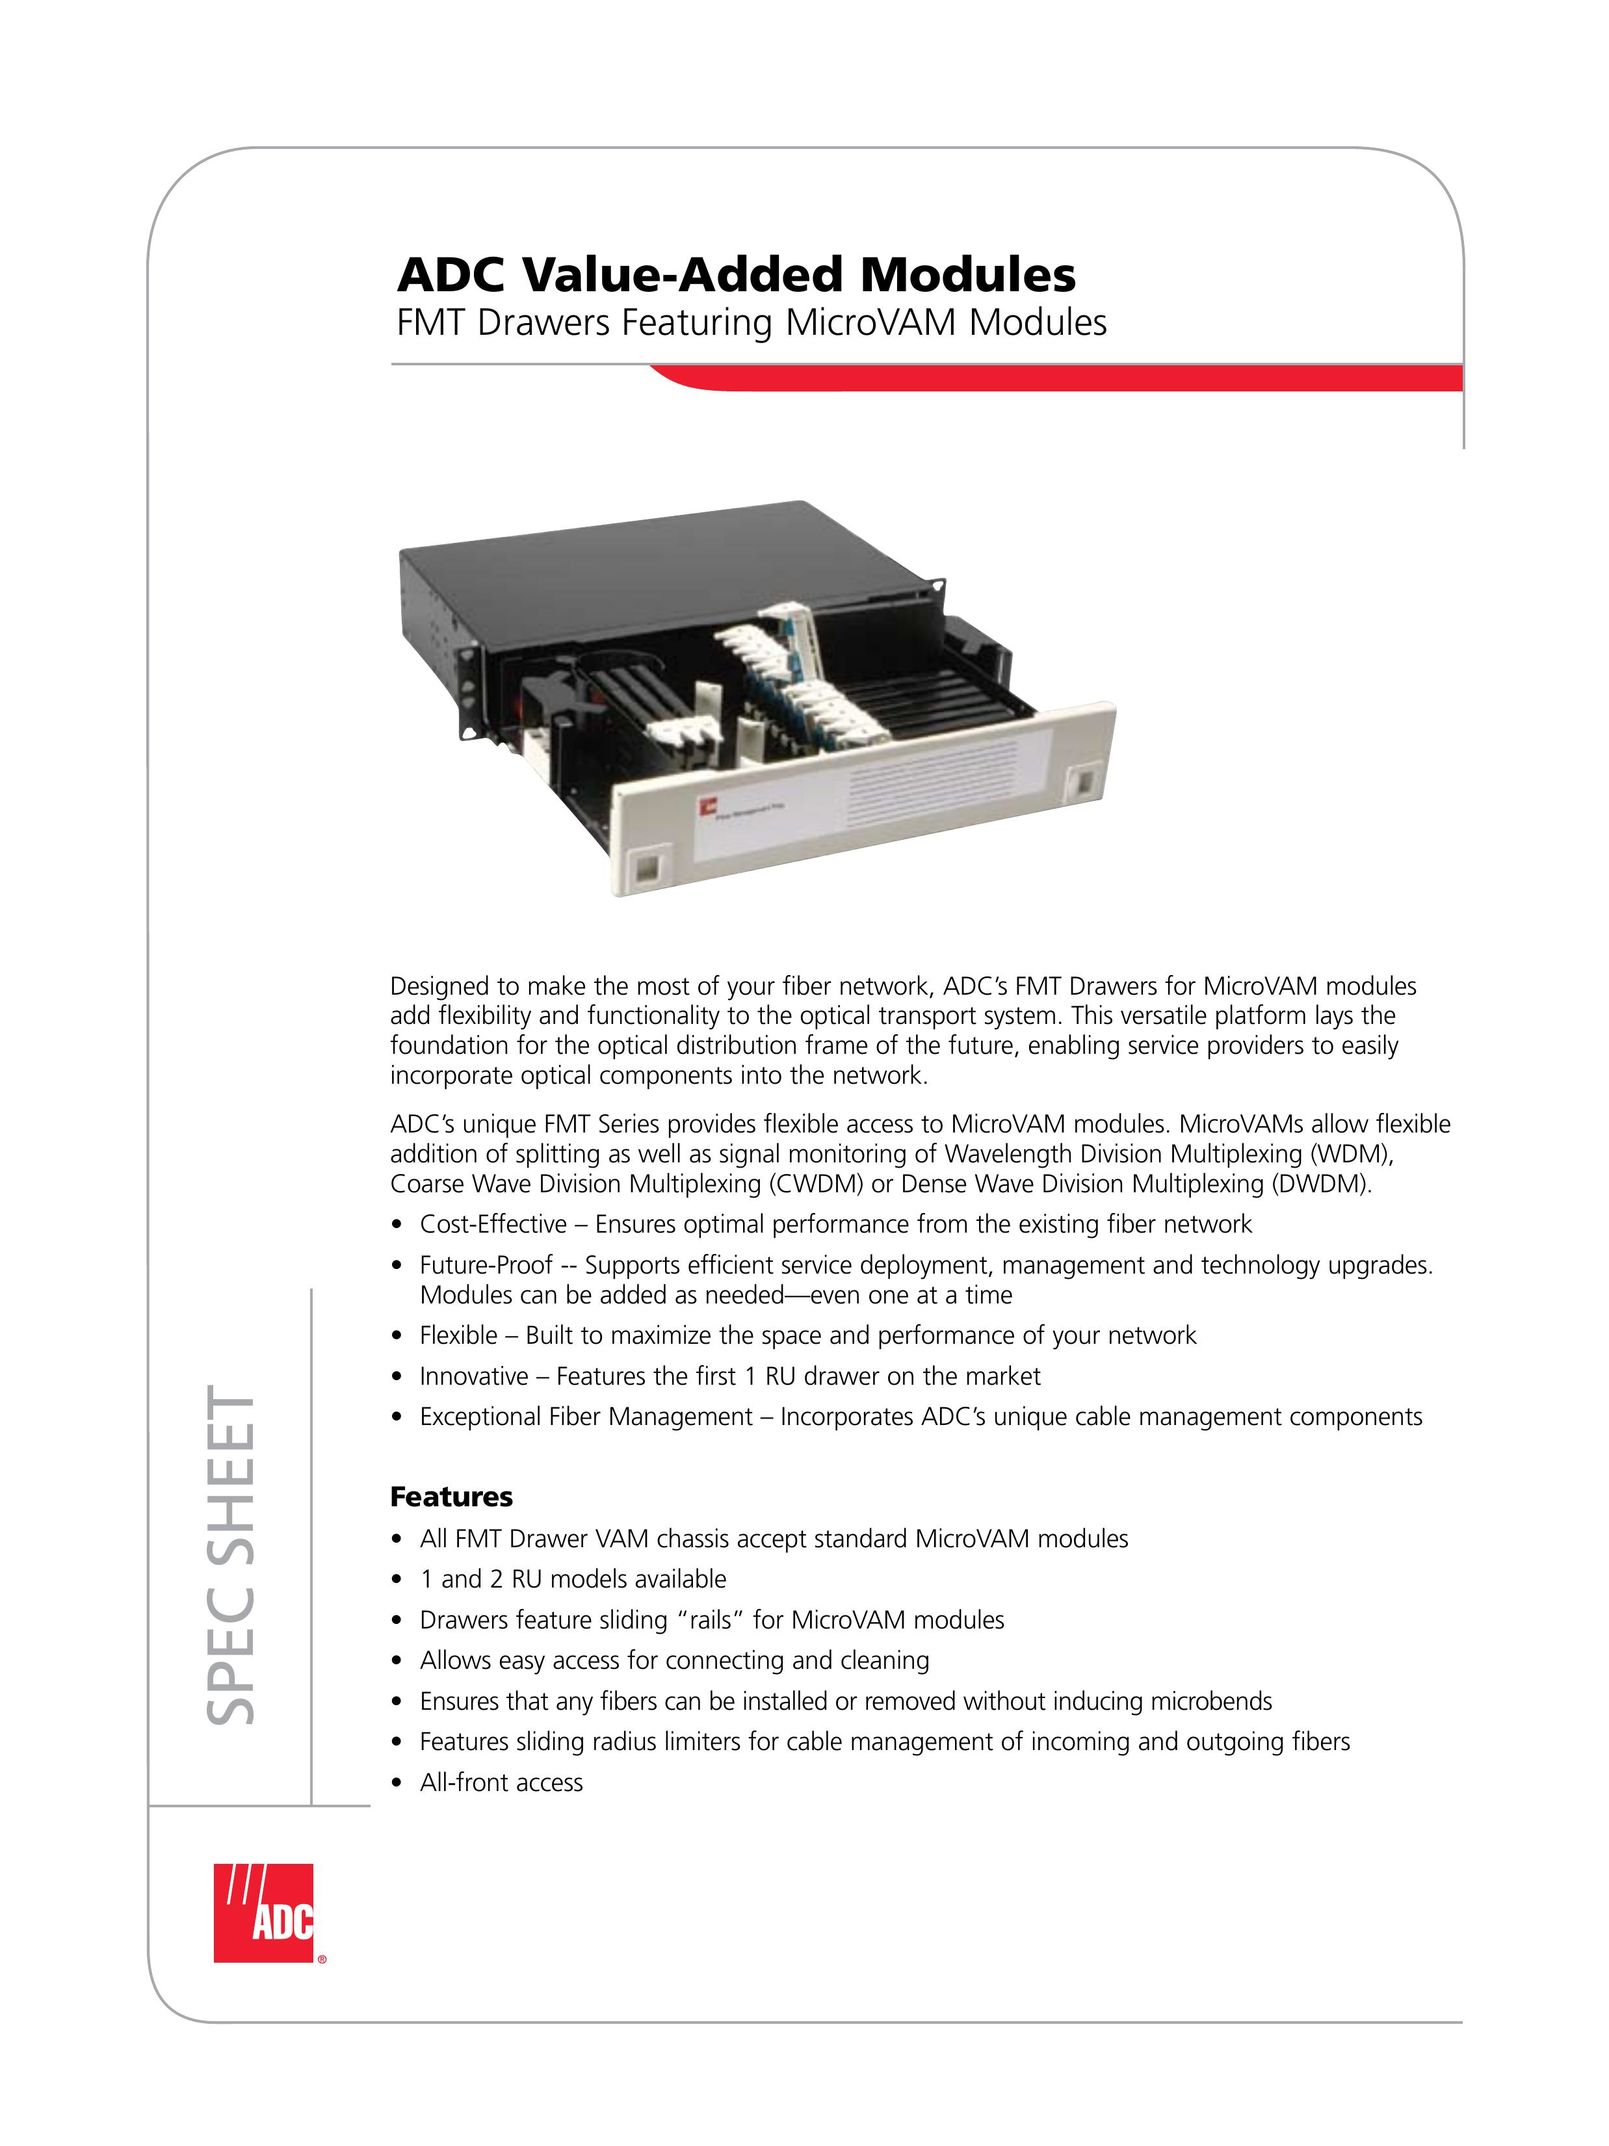 ADC FMT Drawers Featuring MicroVAM Modules Network Card User Manual